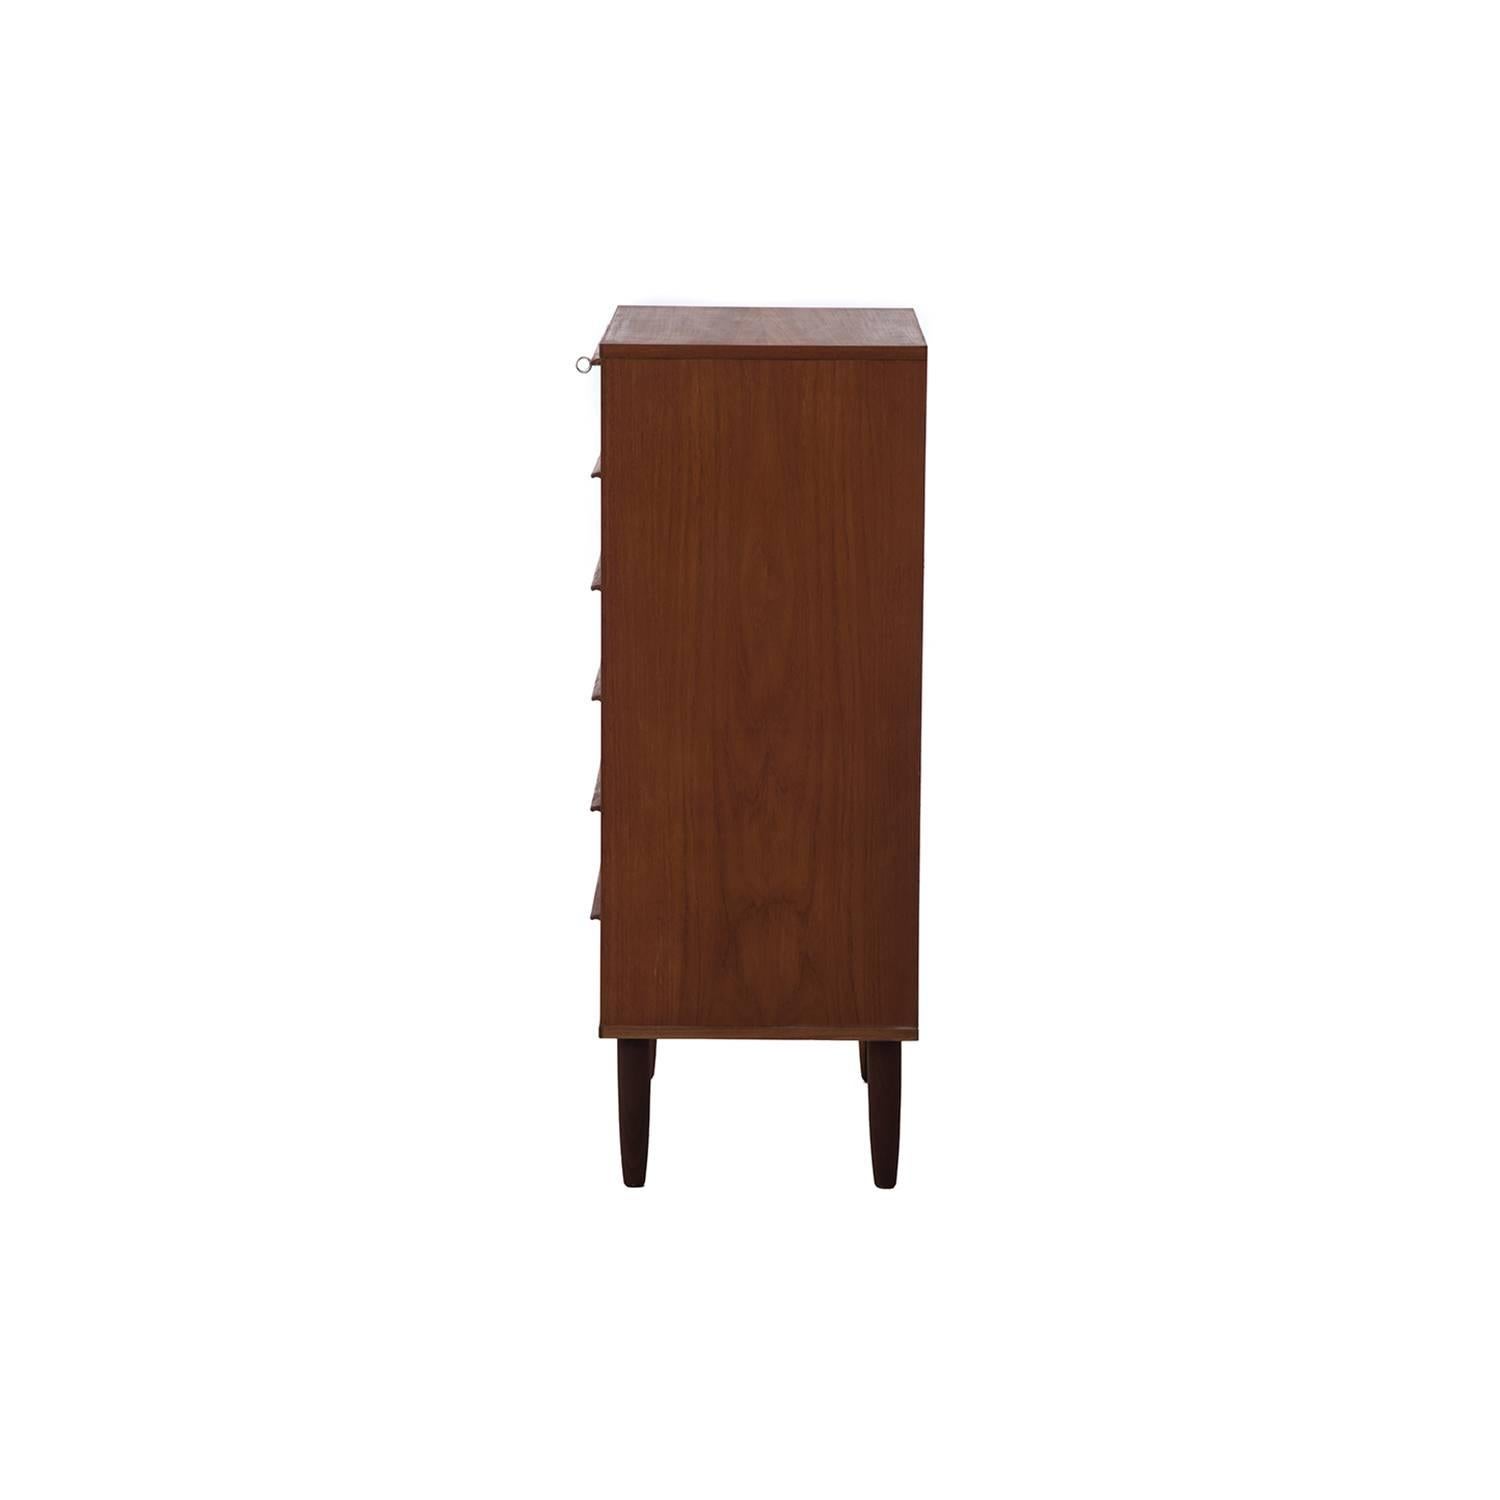 Oiled Danish Modern Chest of Drawers